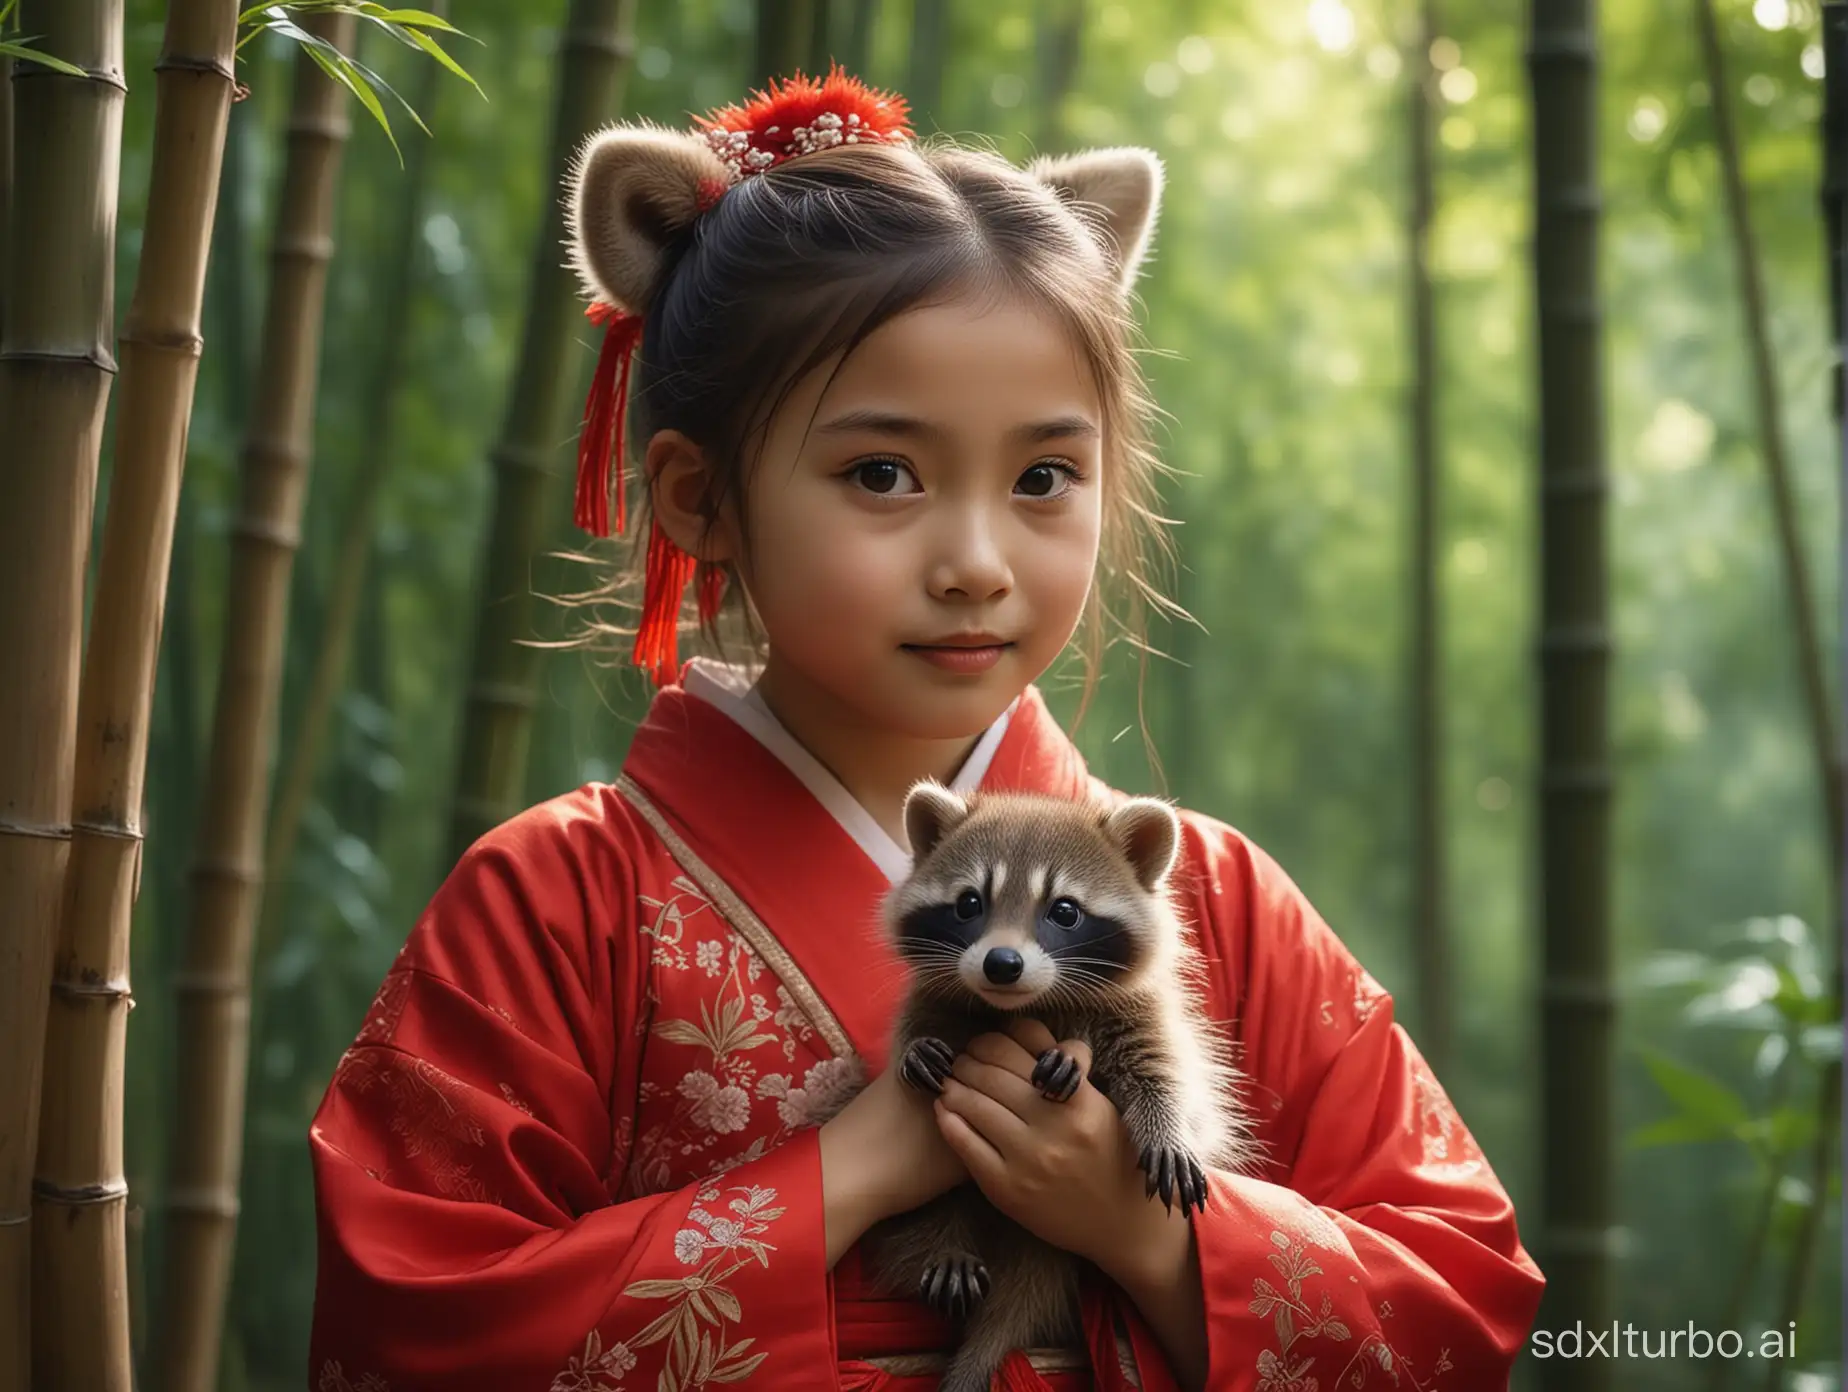 HanfuWearing-Girl-with-Raccoon-in-Bamboo-Forest